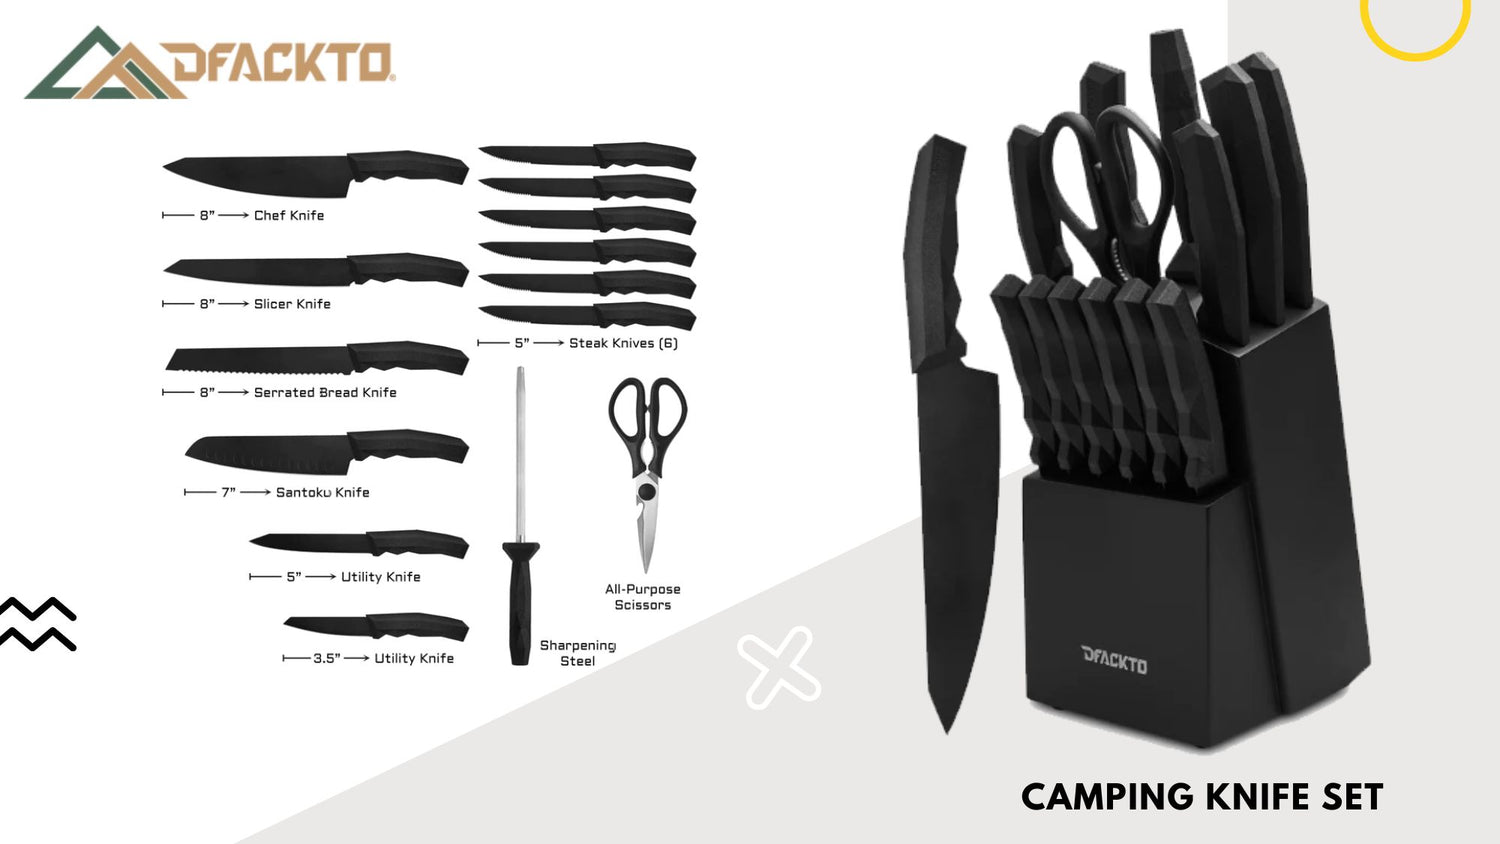 Why Choose Non-Reflective Coating on Camping Knife Set